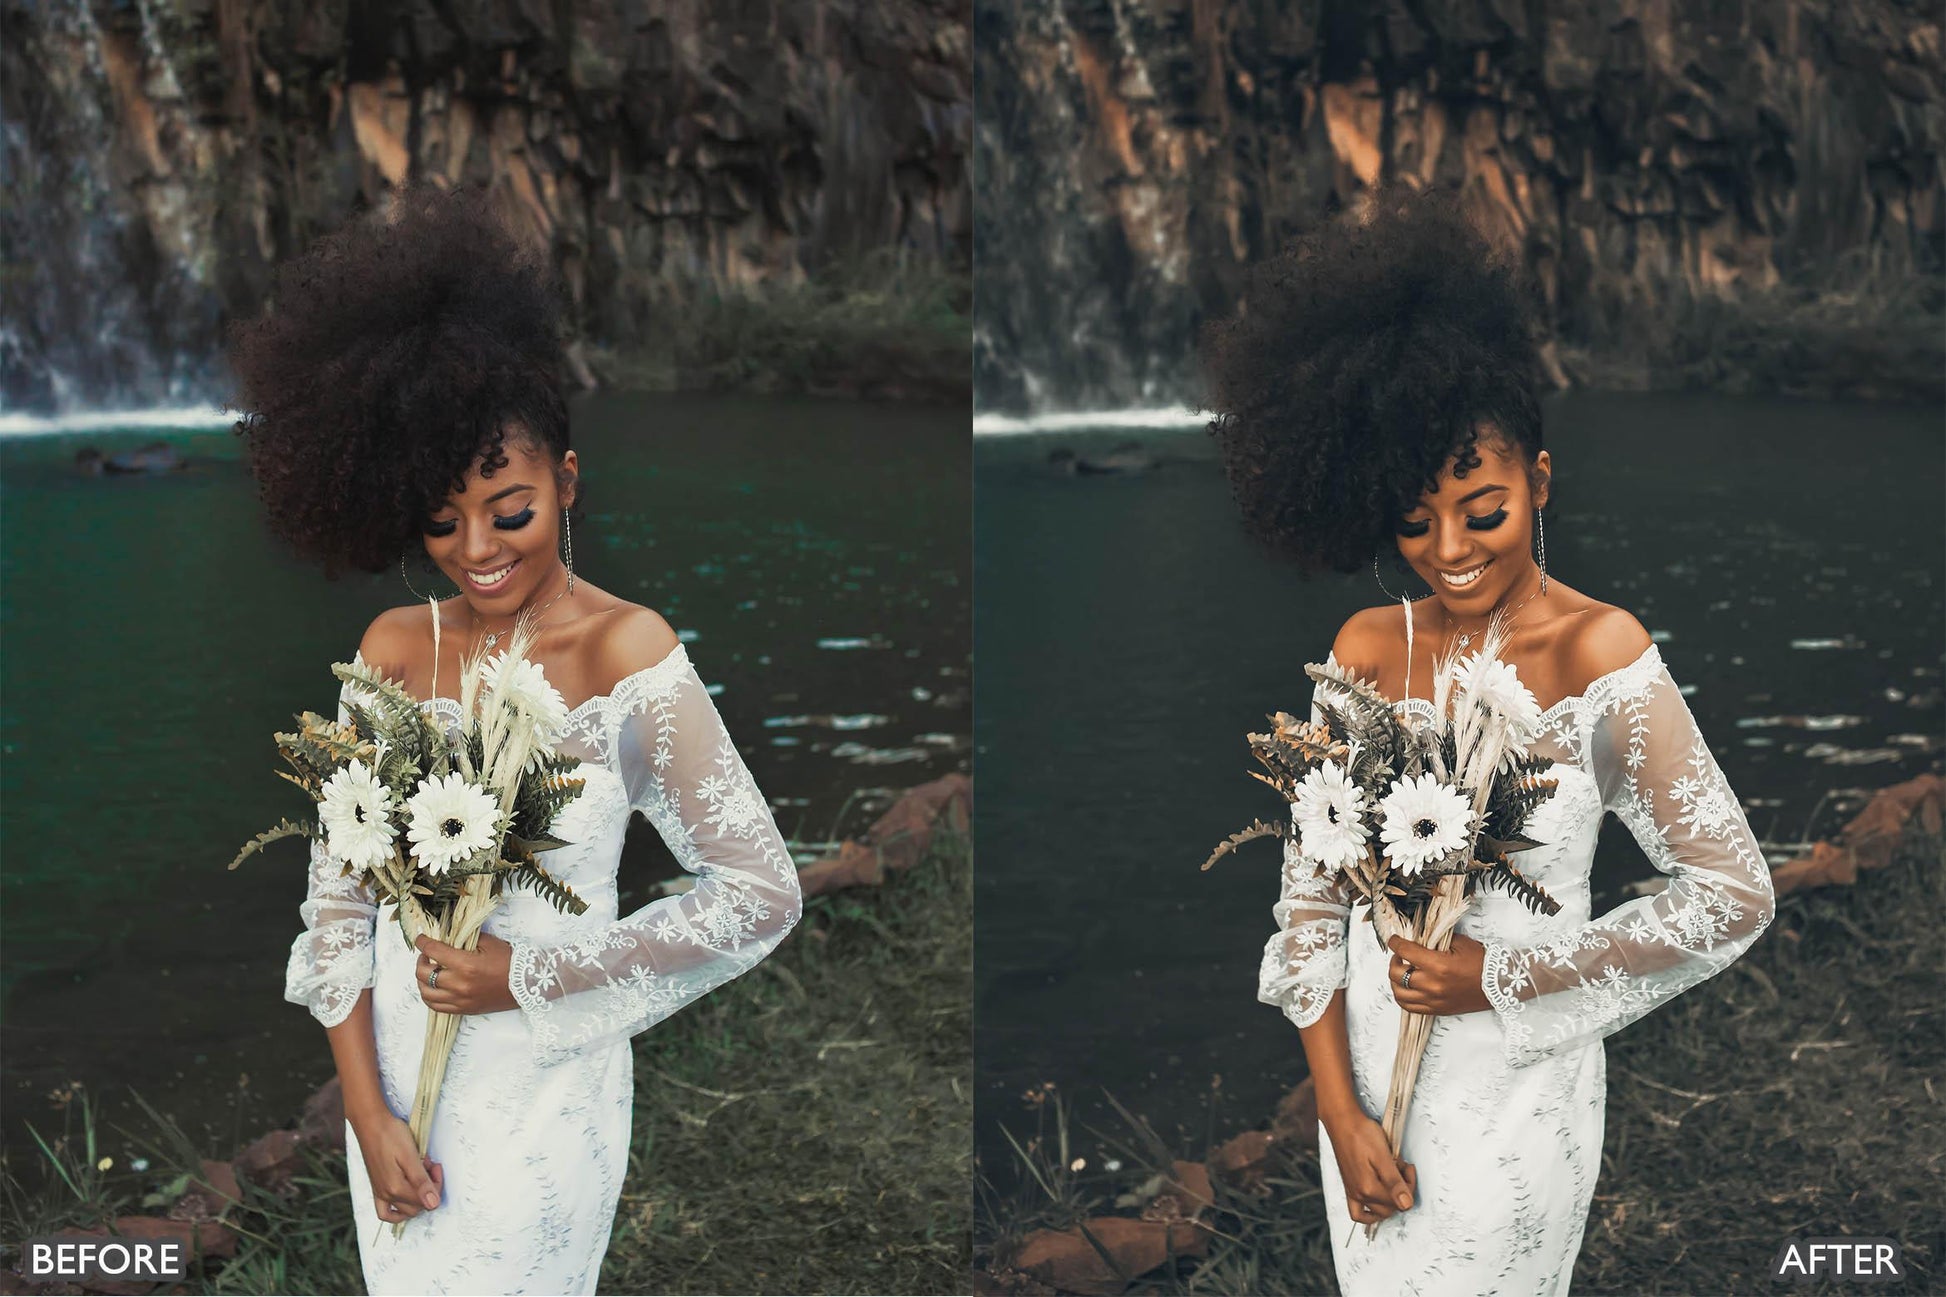 50 Must-Have Lightroom Presets for Wedding Photography - adobe lightroom presets, Blogger presets, Cinematic Presets, instagram presets, lightroom presets, Minimalist presets, moody presets, Portrait presets, presets before and after, professional lightroom presets, Wedding Lightroom Presets Bundle - aaapresets.com